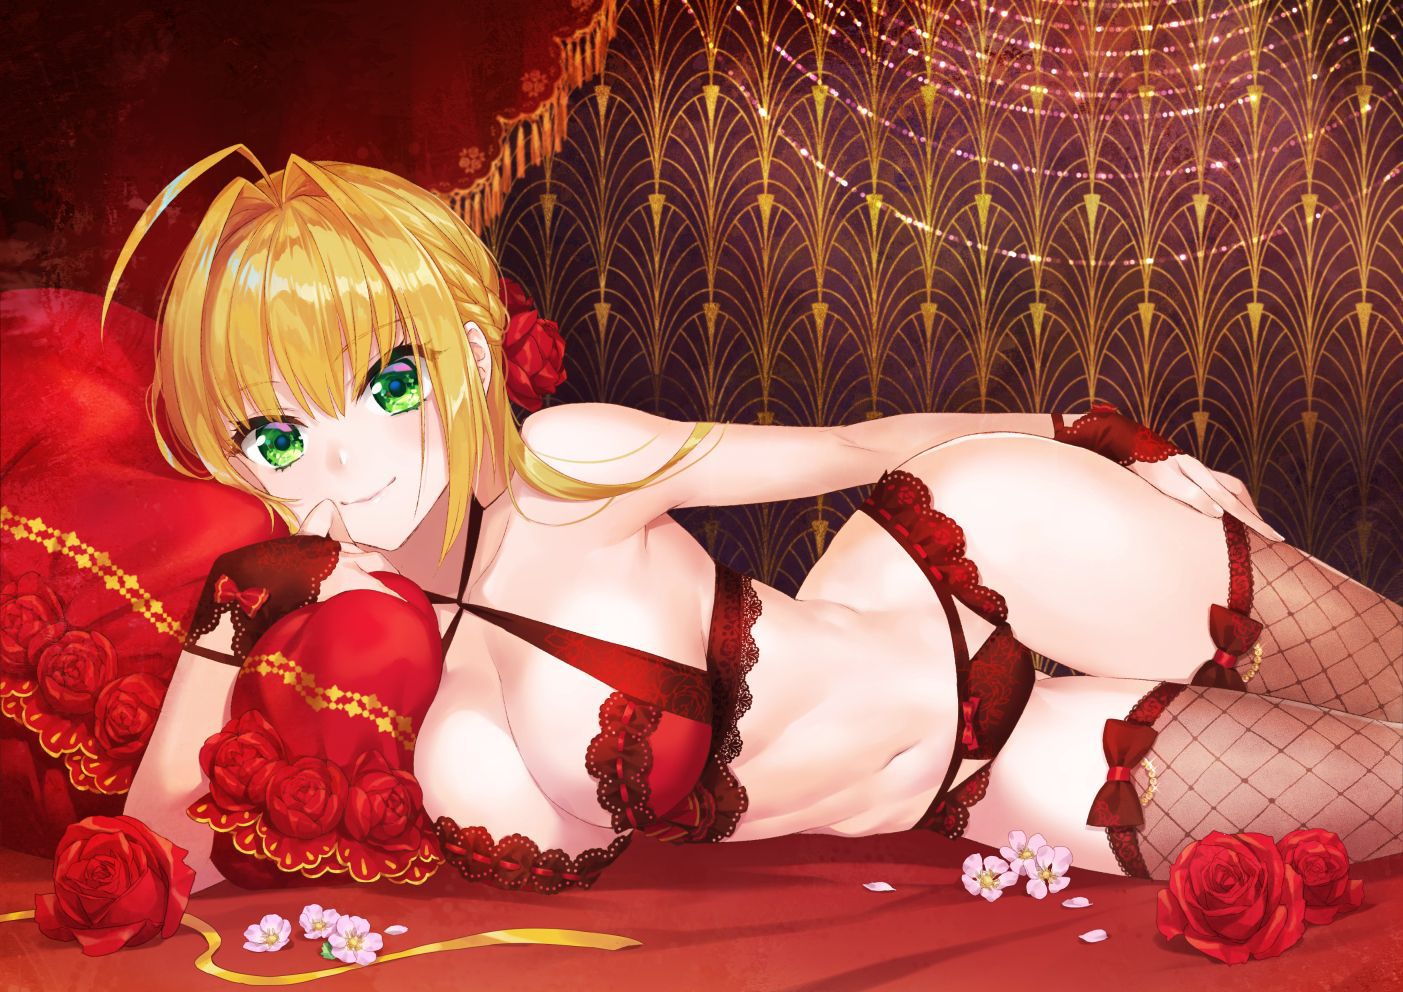 【Secondary】 Fate/Grand Order (Fate/EXTRA-CCC), Nero Claudius' love images summary! No.16 [20 sheets] 18